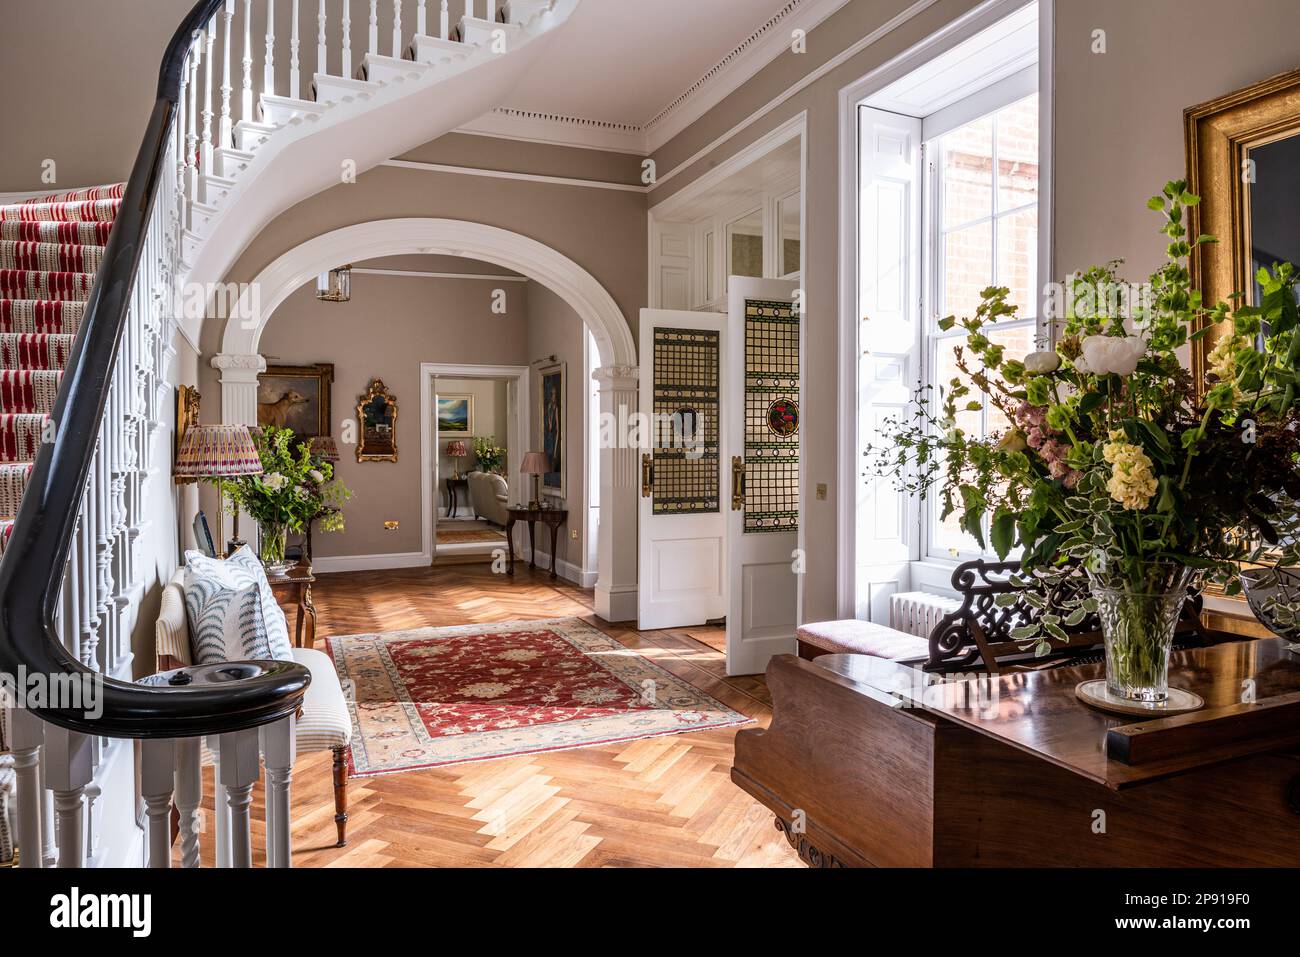 Staircase with grand piano in renovated entrance of 18th century Grade II listed Suffolk country house, UK Stock Photo